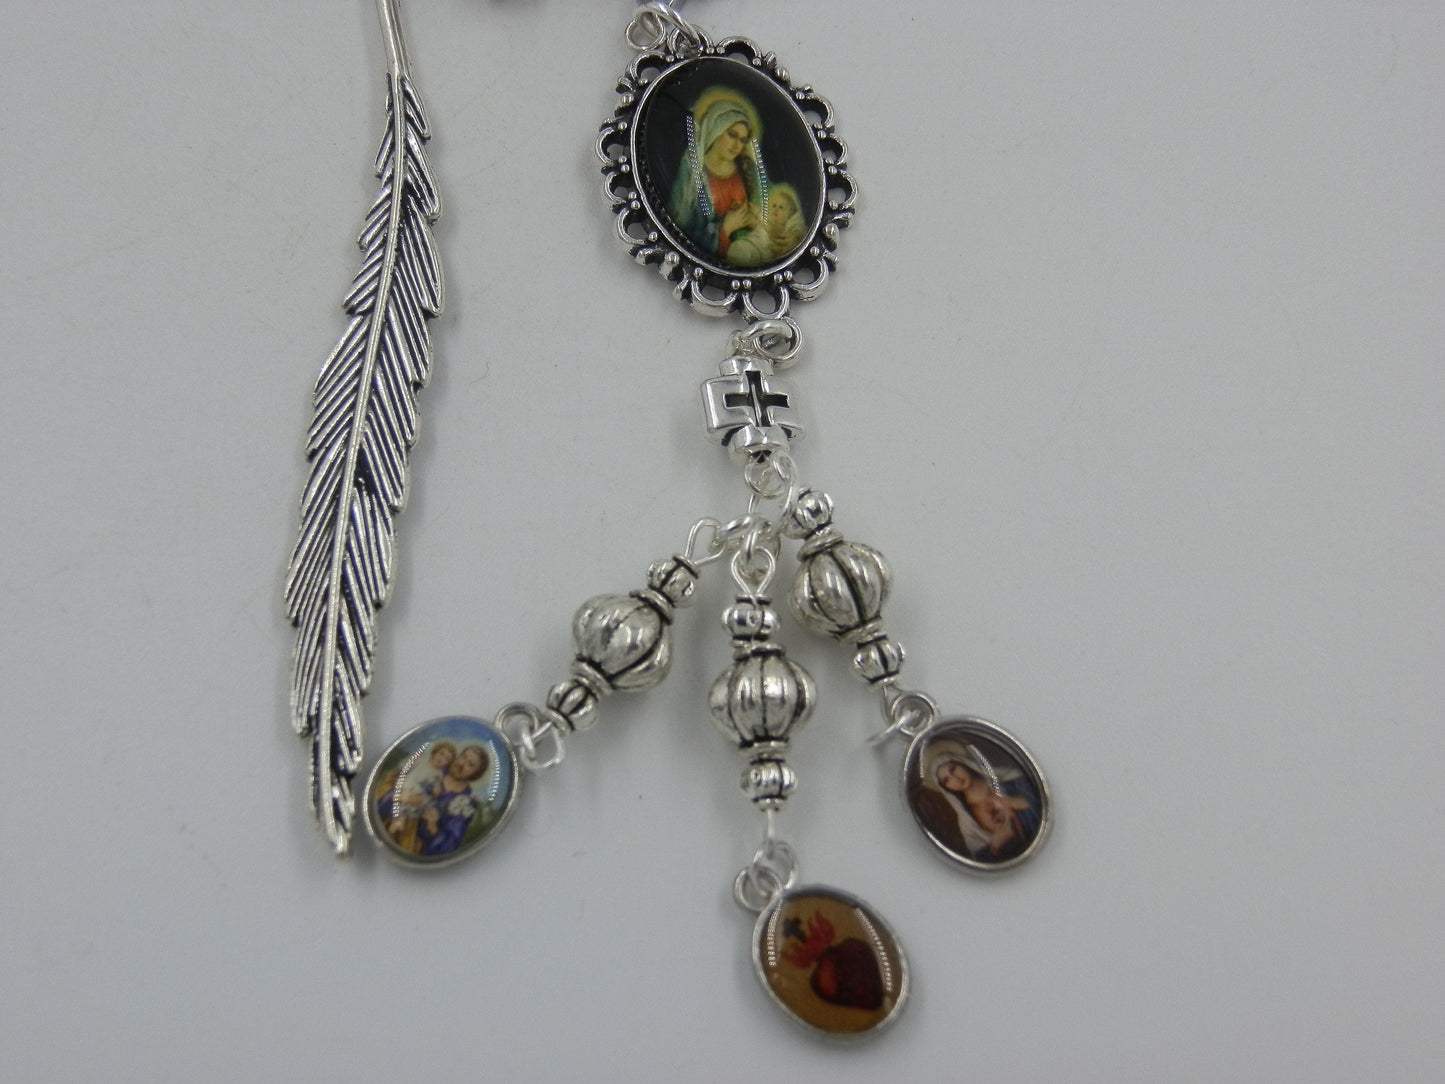 Religious bookmark, St. Joseph medal, Sacred heart medal, Our Lady of Sorrows medal, Religious gifts, Handmade bookmarker.